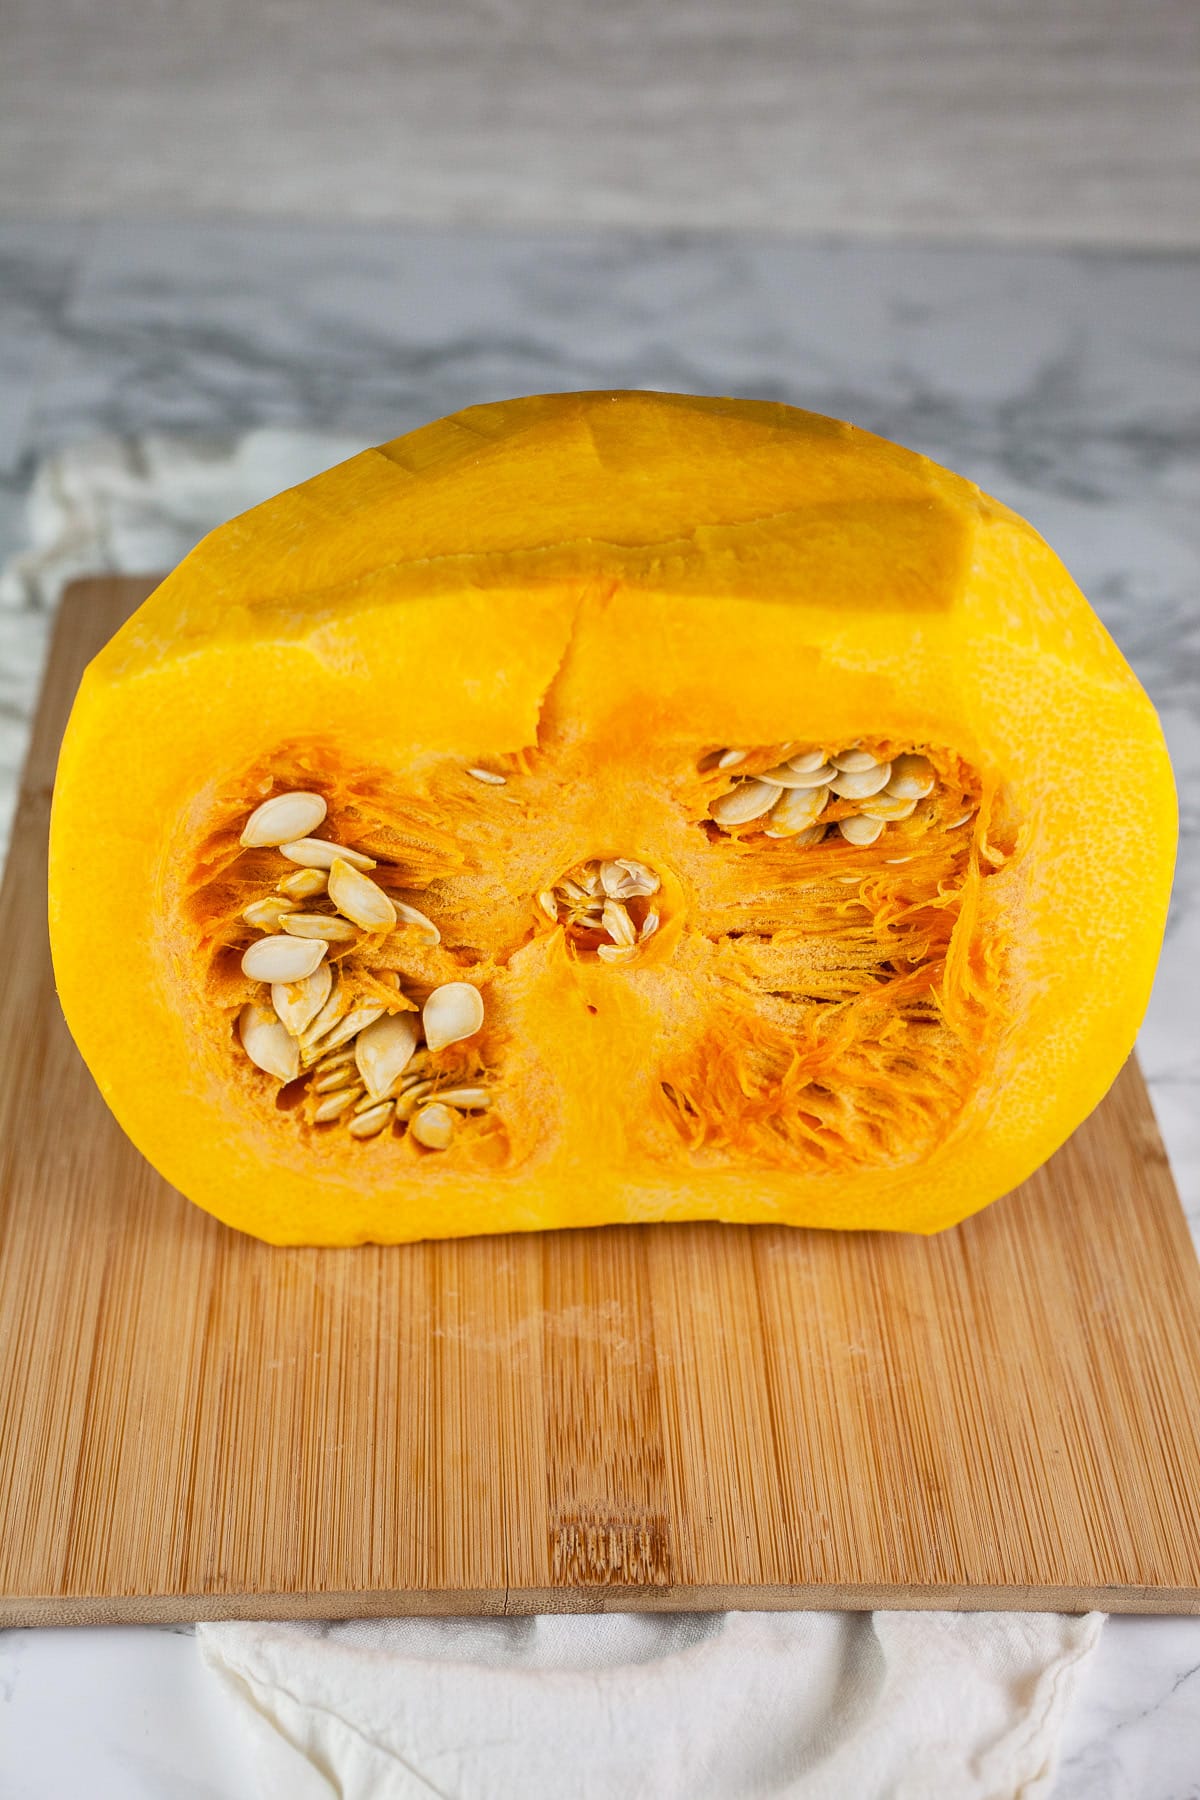 Peeled pumpkin cut in half with seeds on wooden cutting board.